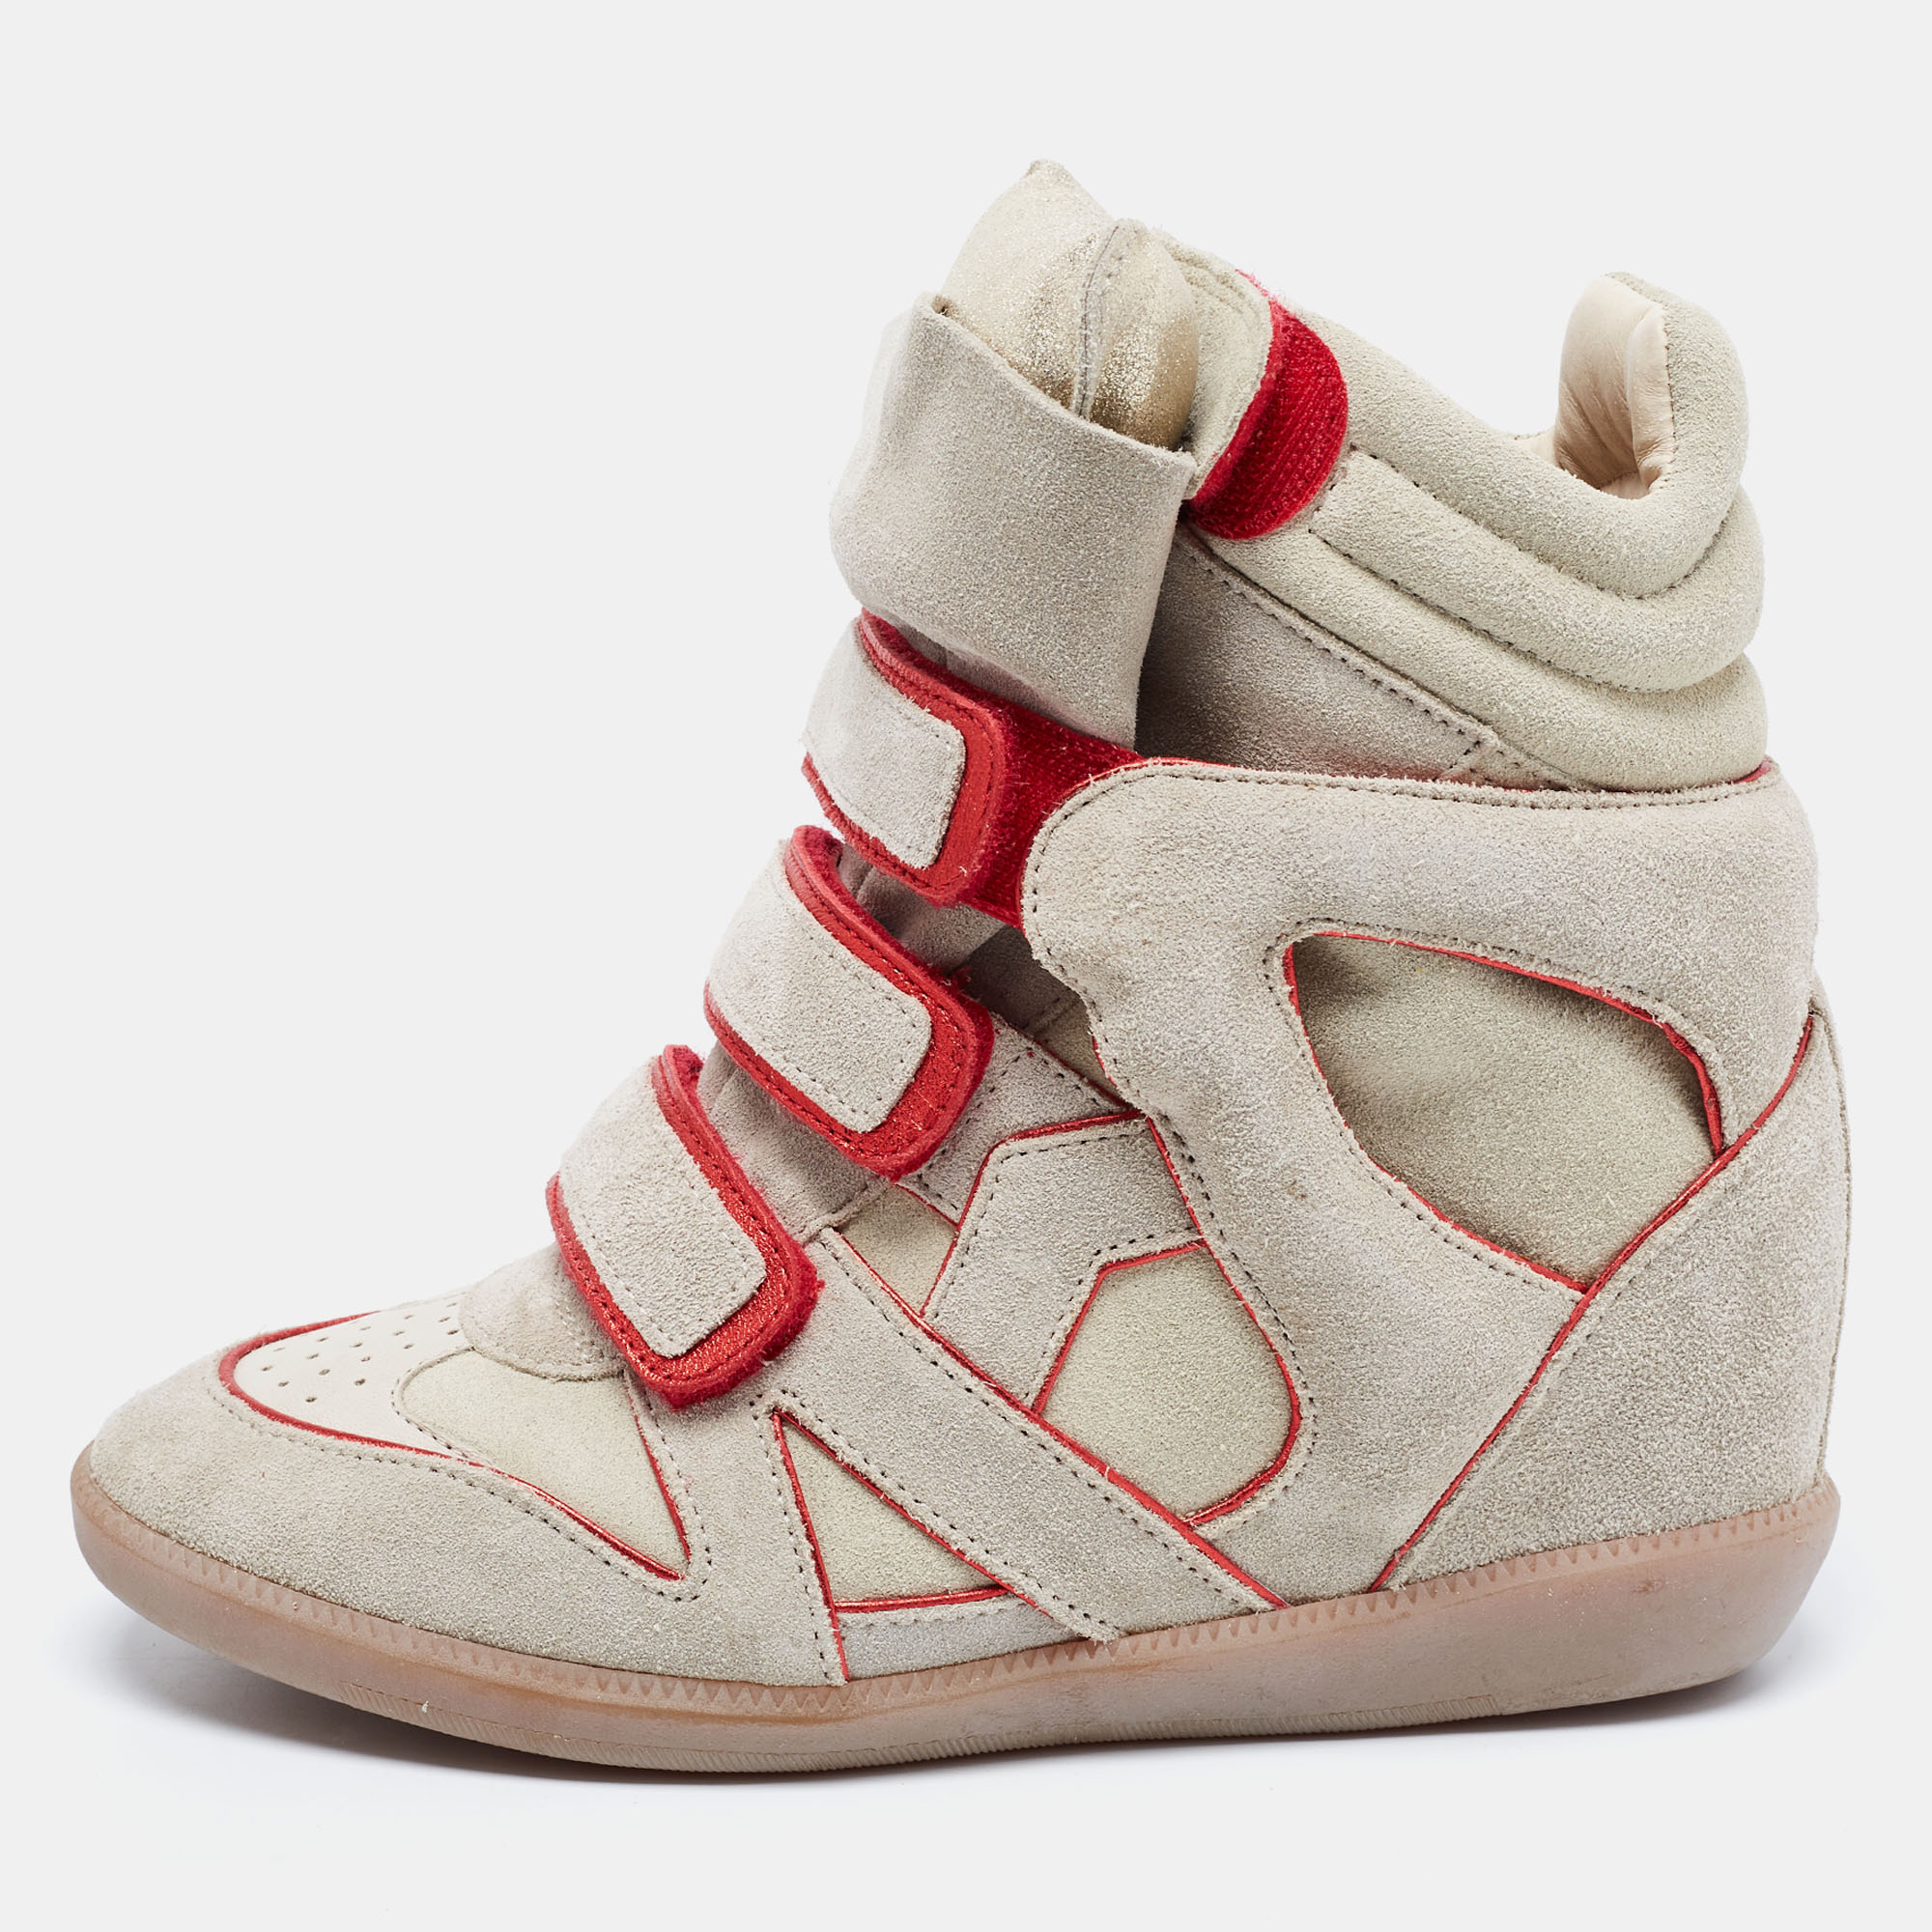 ISABEL MARANT Sneakers BRYCE in white/ light gray/ light red